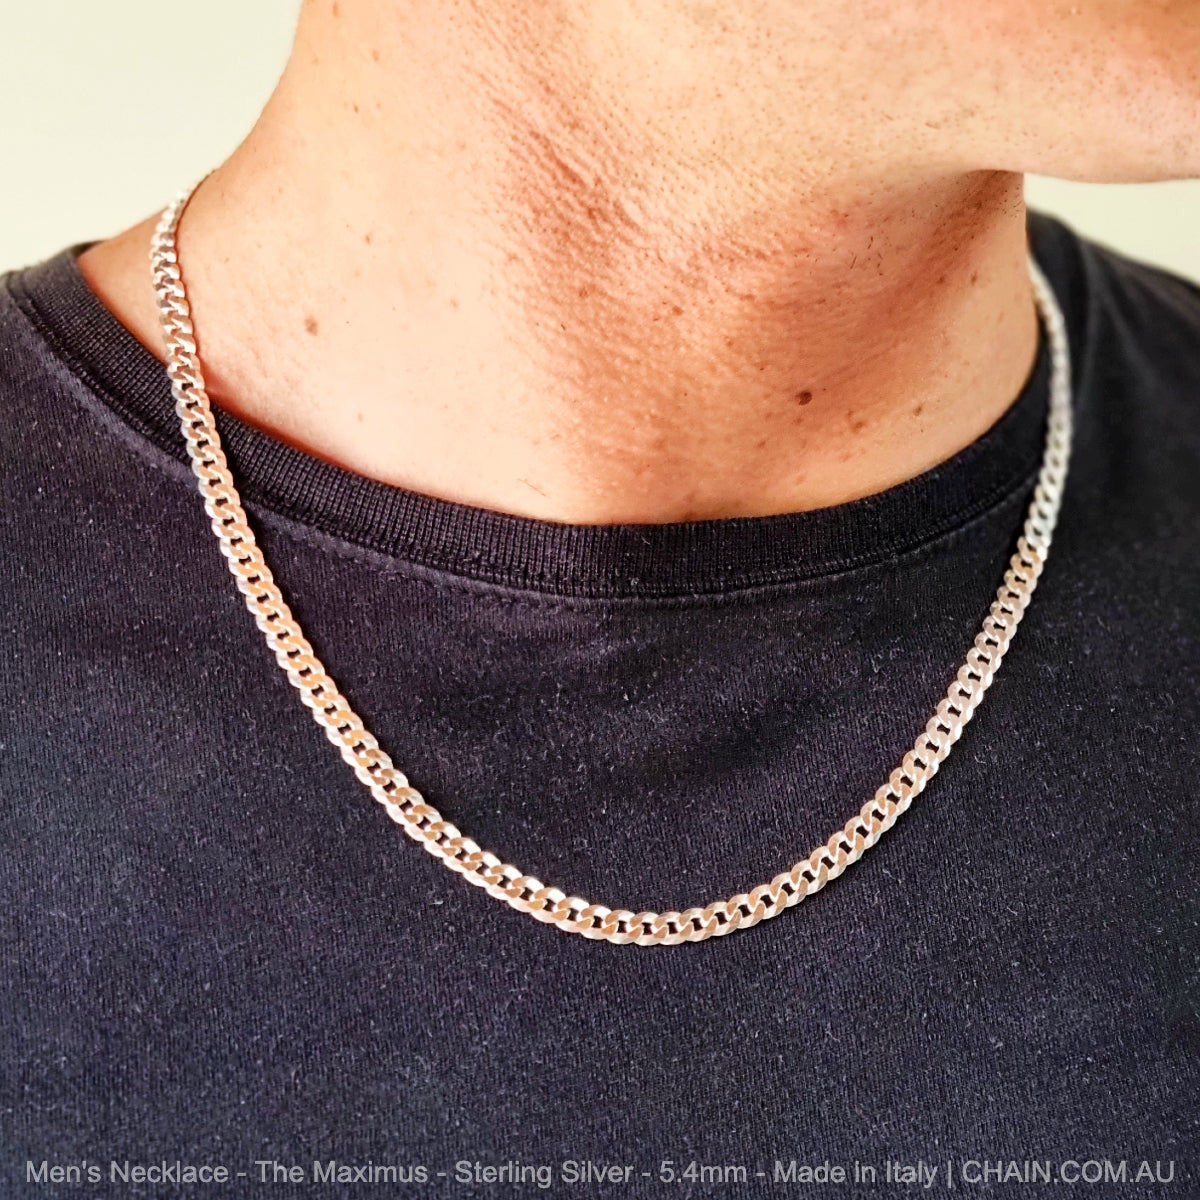 Men's Chain Necklace - The Maximus - Sterling Silver - 5.4mm - Made in Italy. Australia wide shipping. Shop jewellery chain chain.com.au